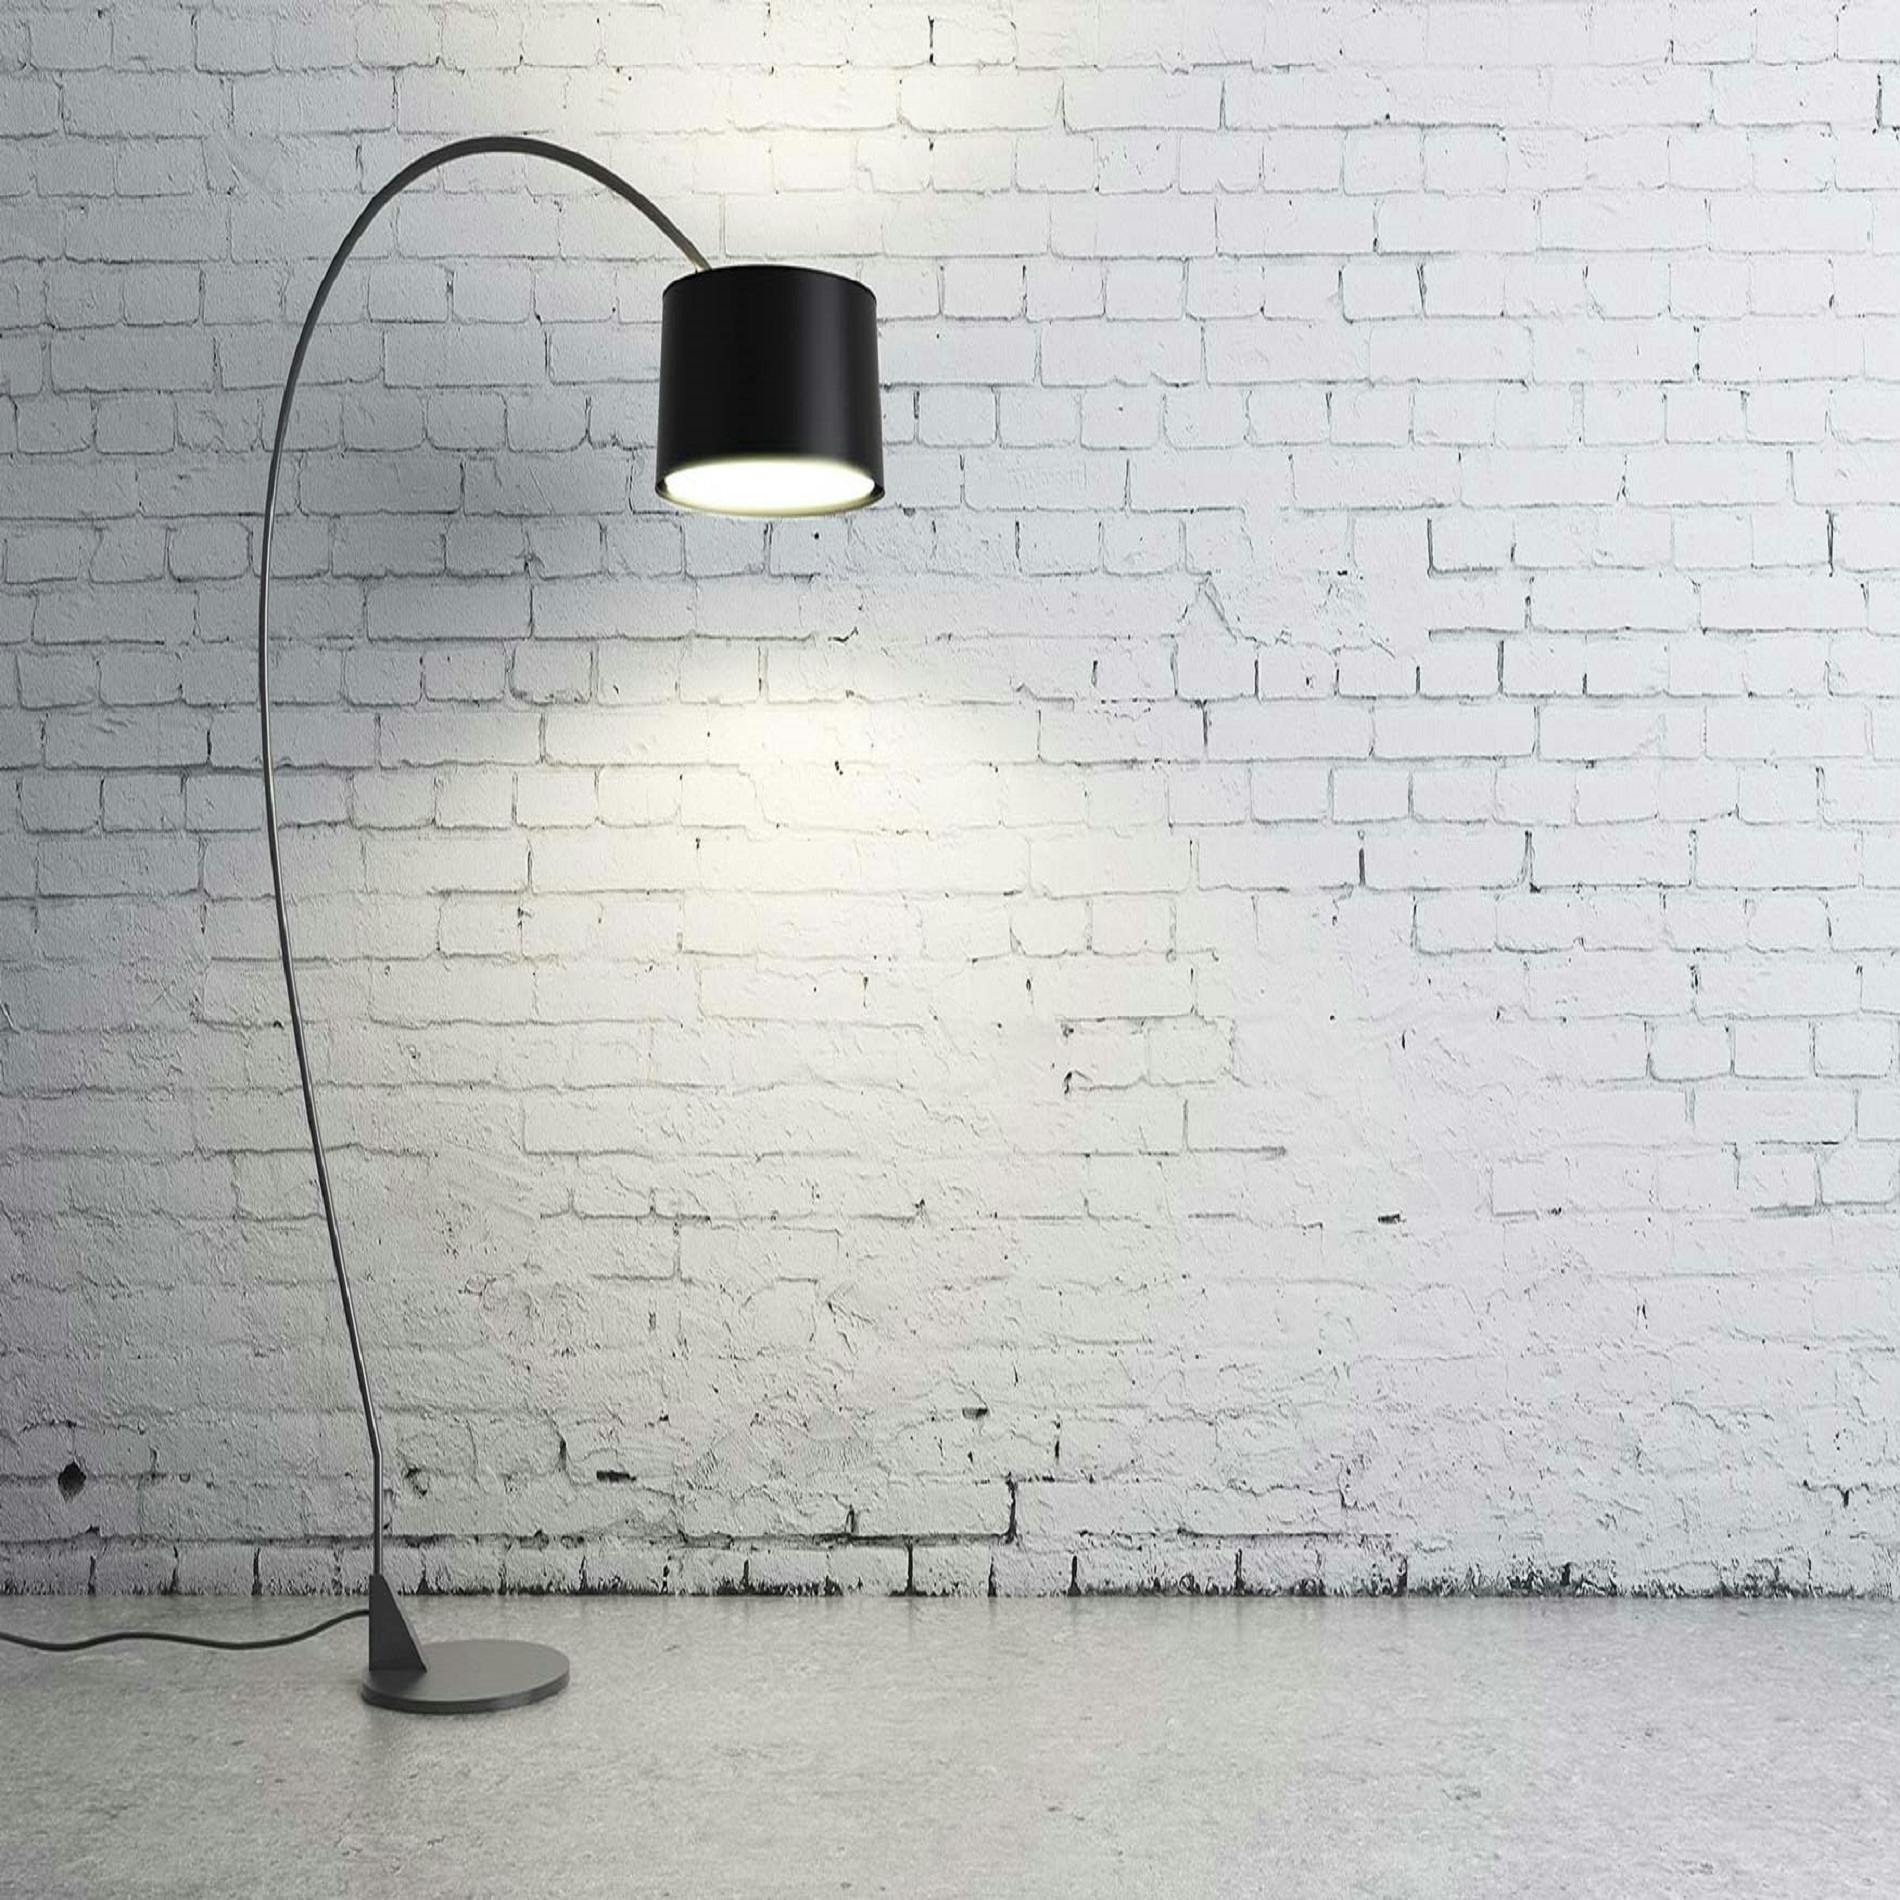 Lamp Photos, Download The BEST Free Lamp Stock Photos & HD Images